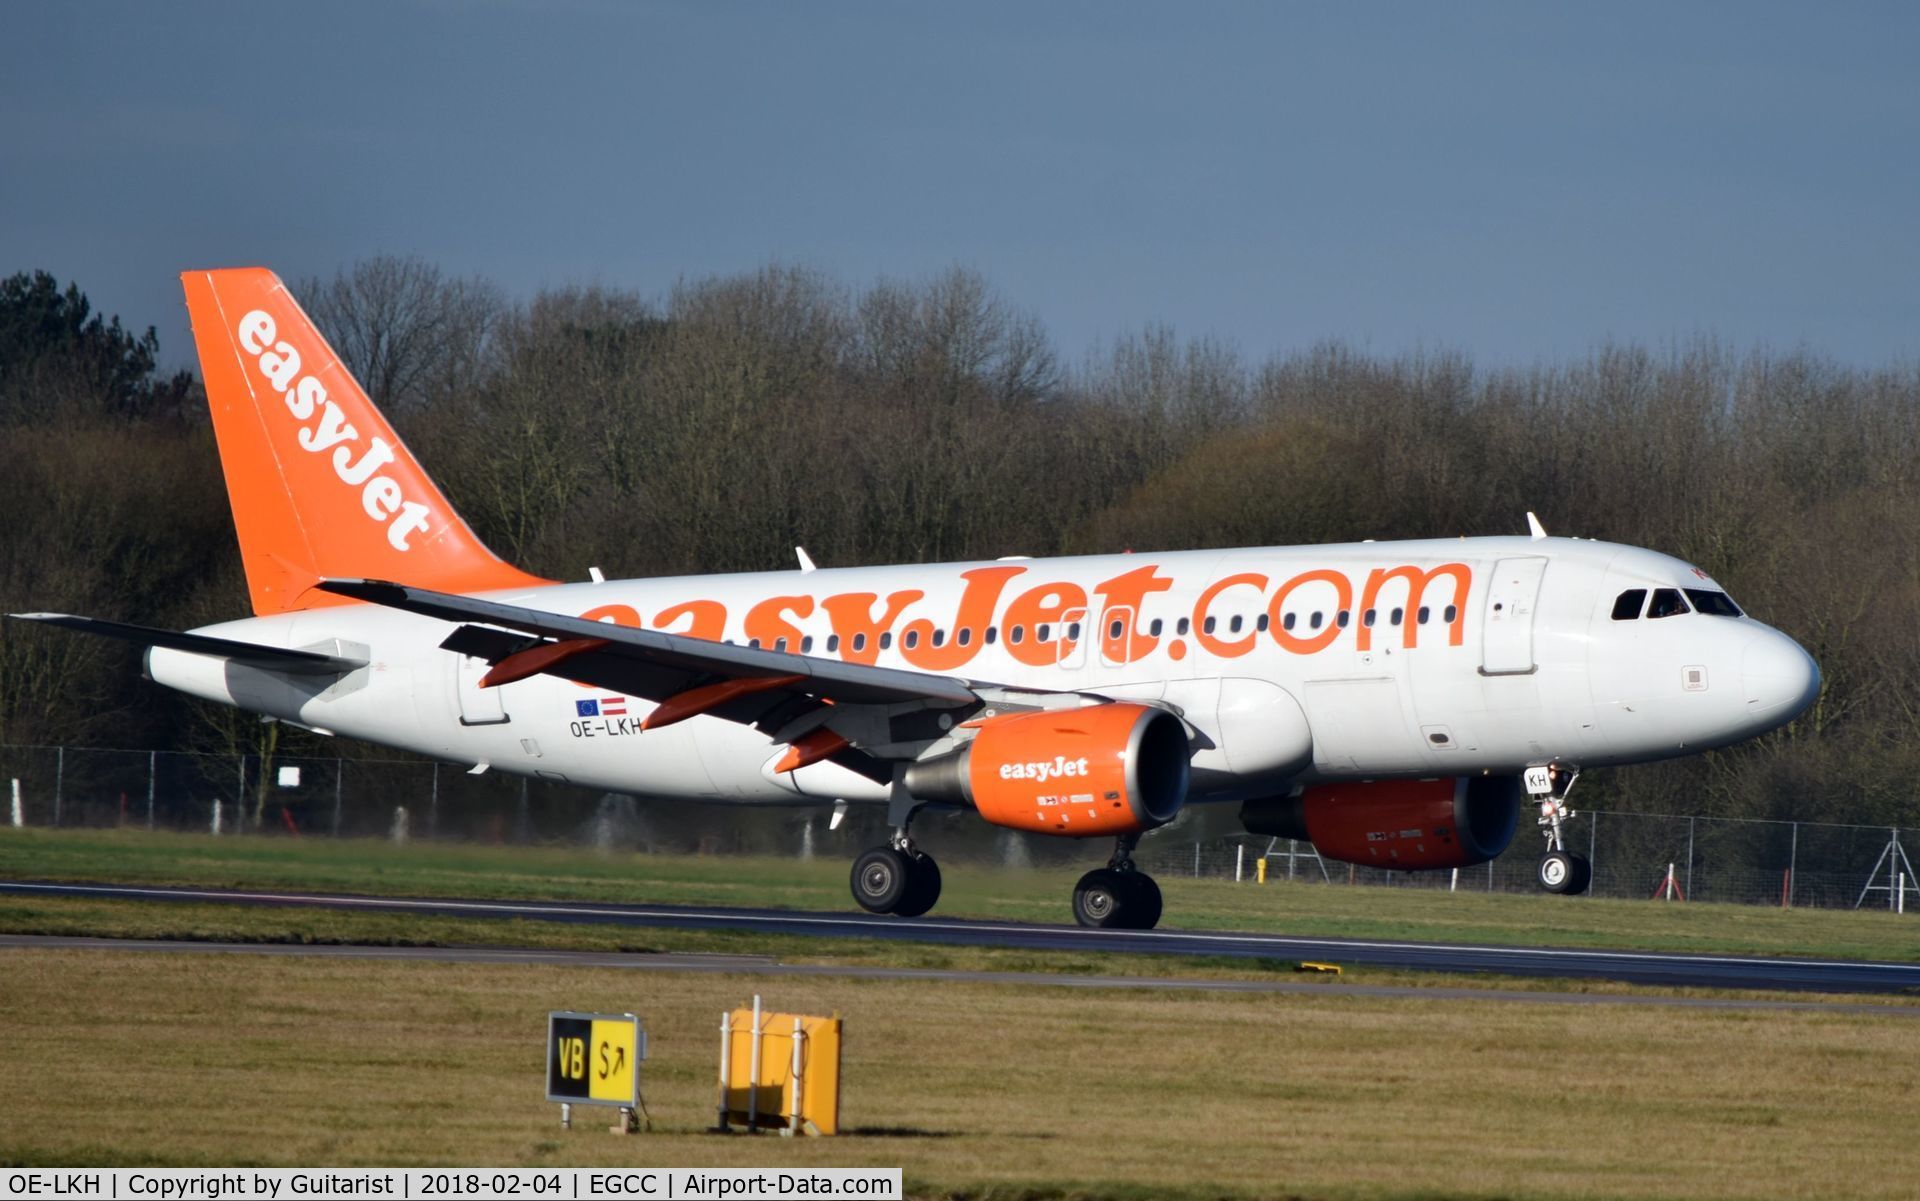 OE-LKH, 2006 Airbus A319-111 C/N 2827, At Manchester